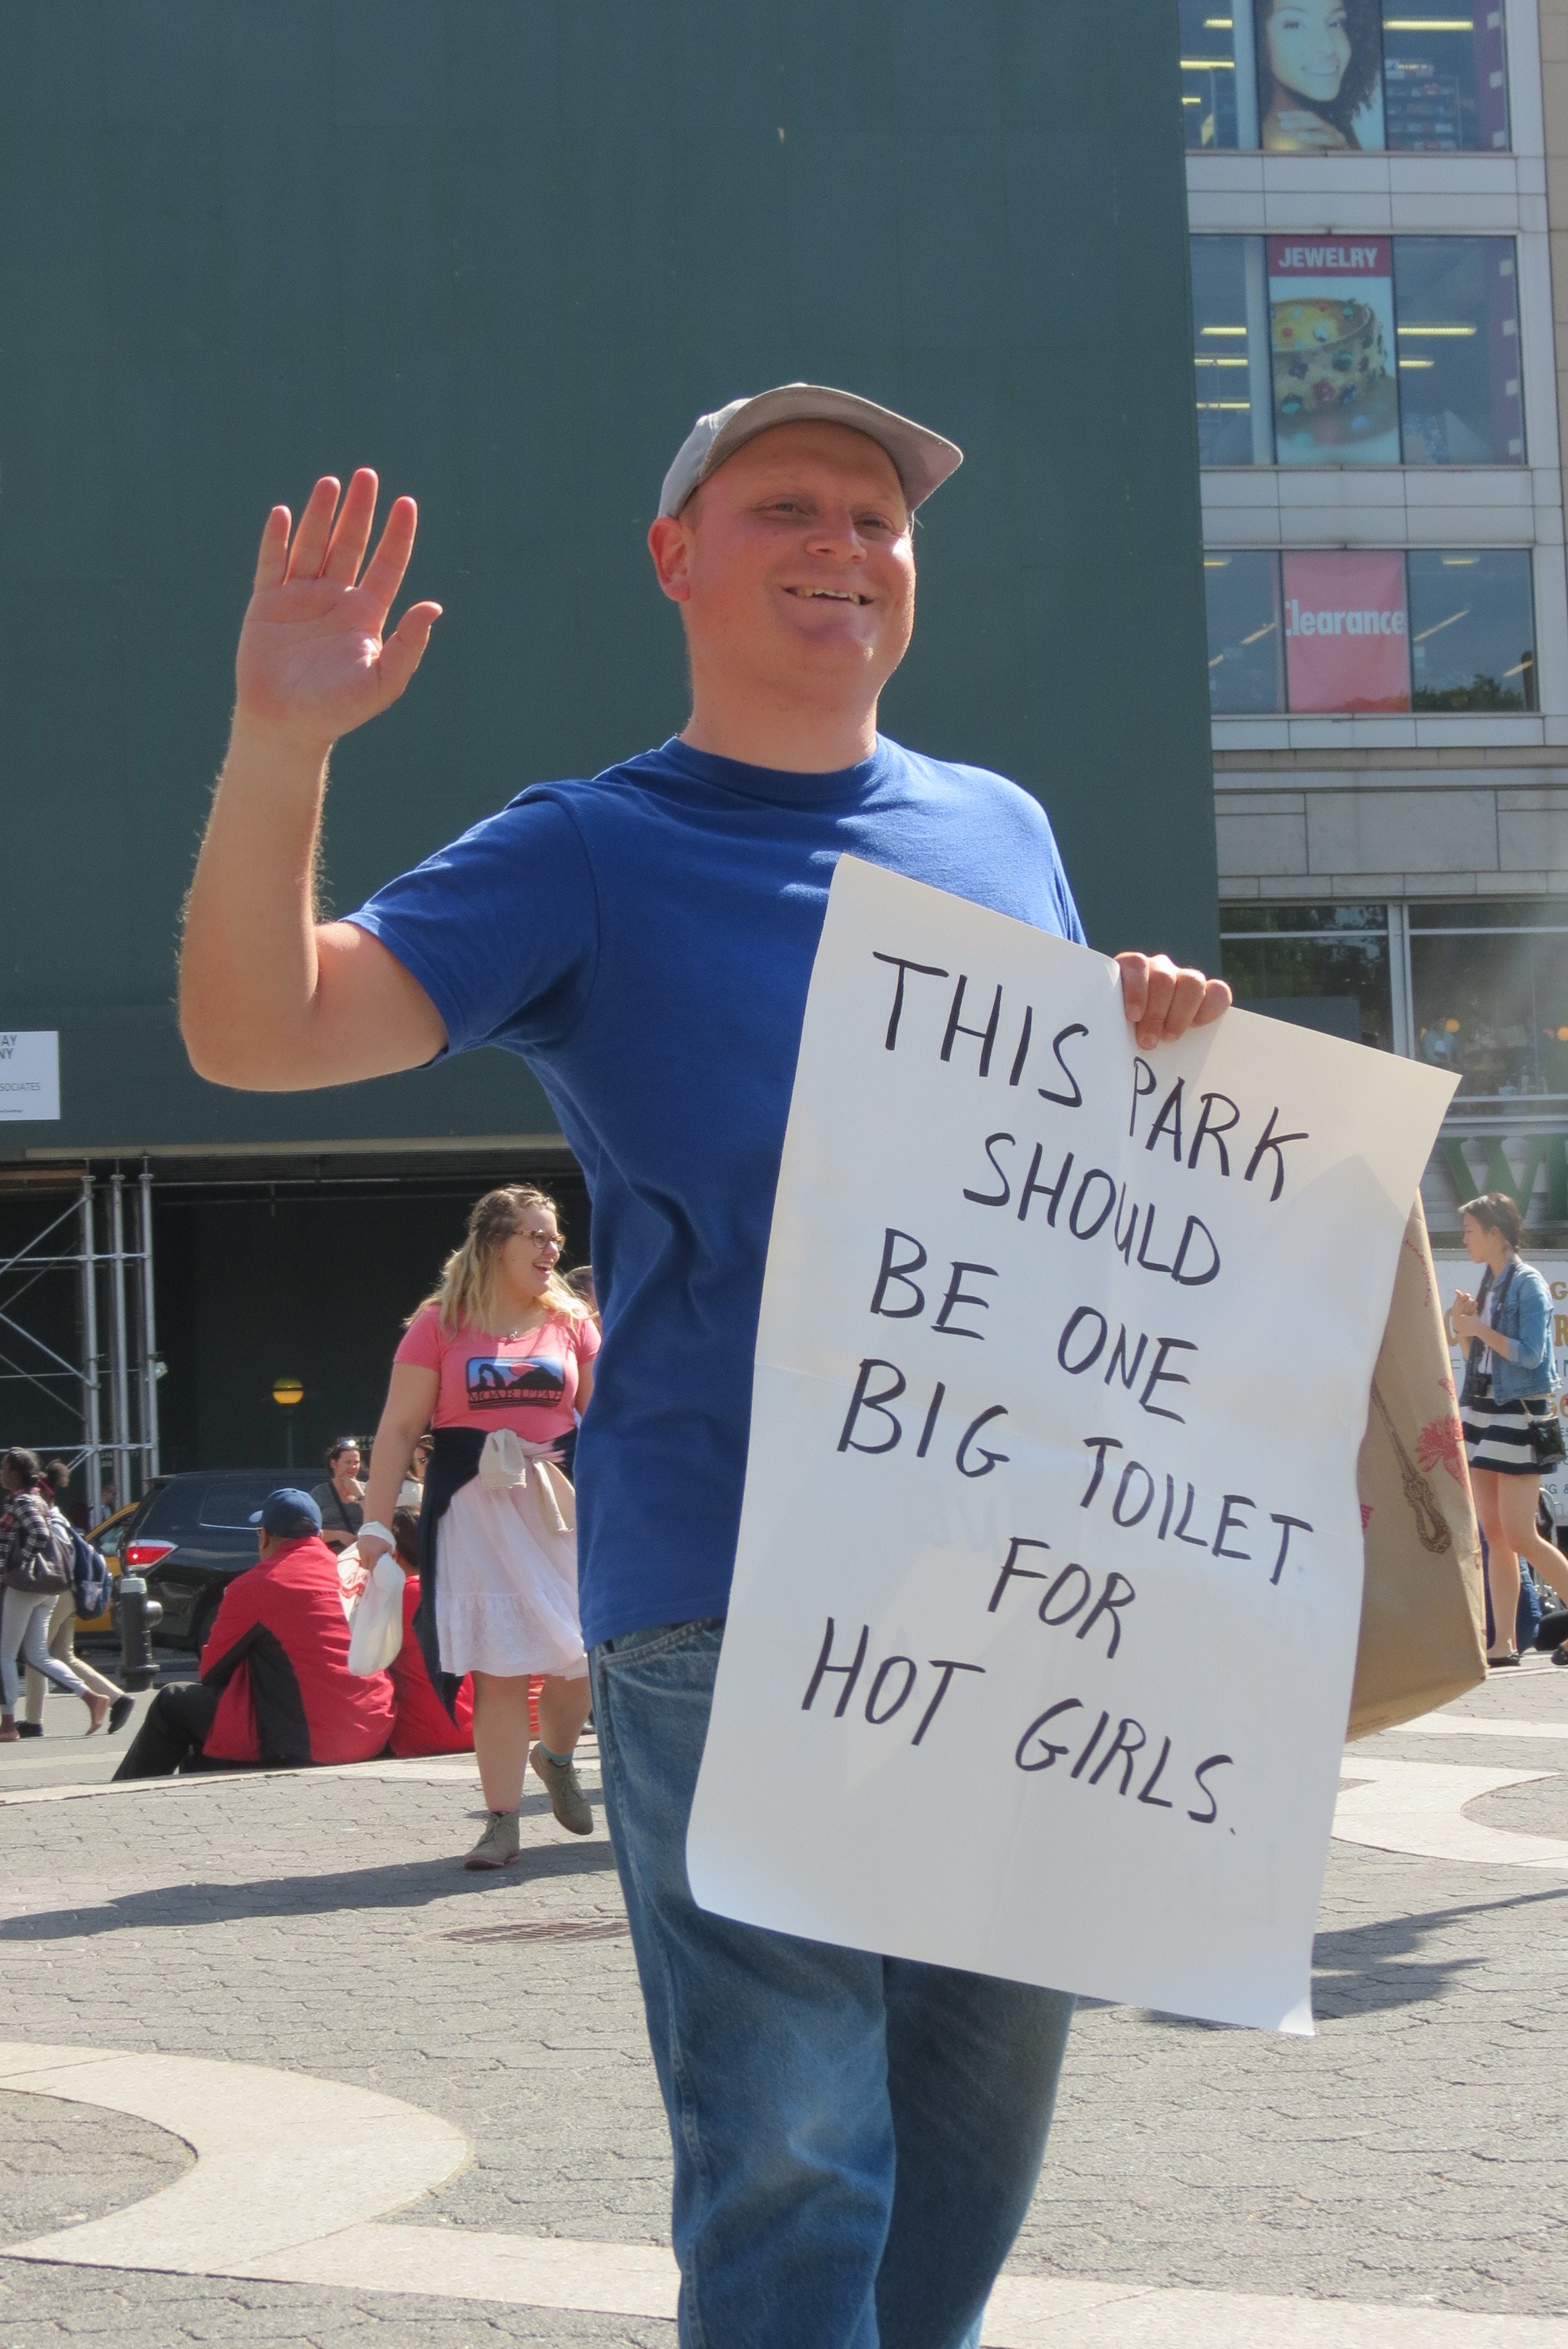 man with funny sex sign waving